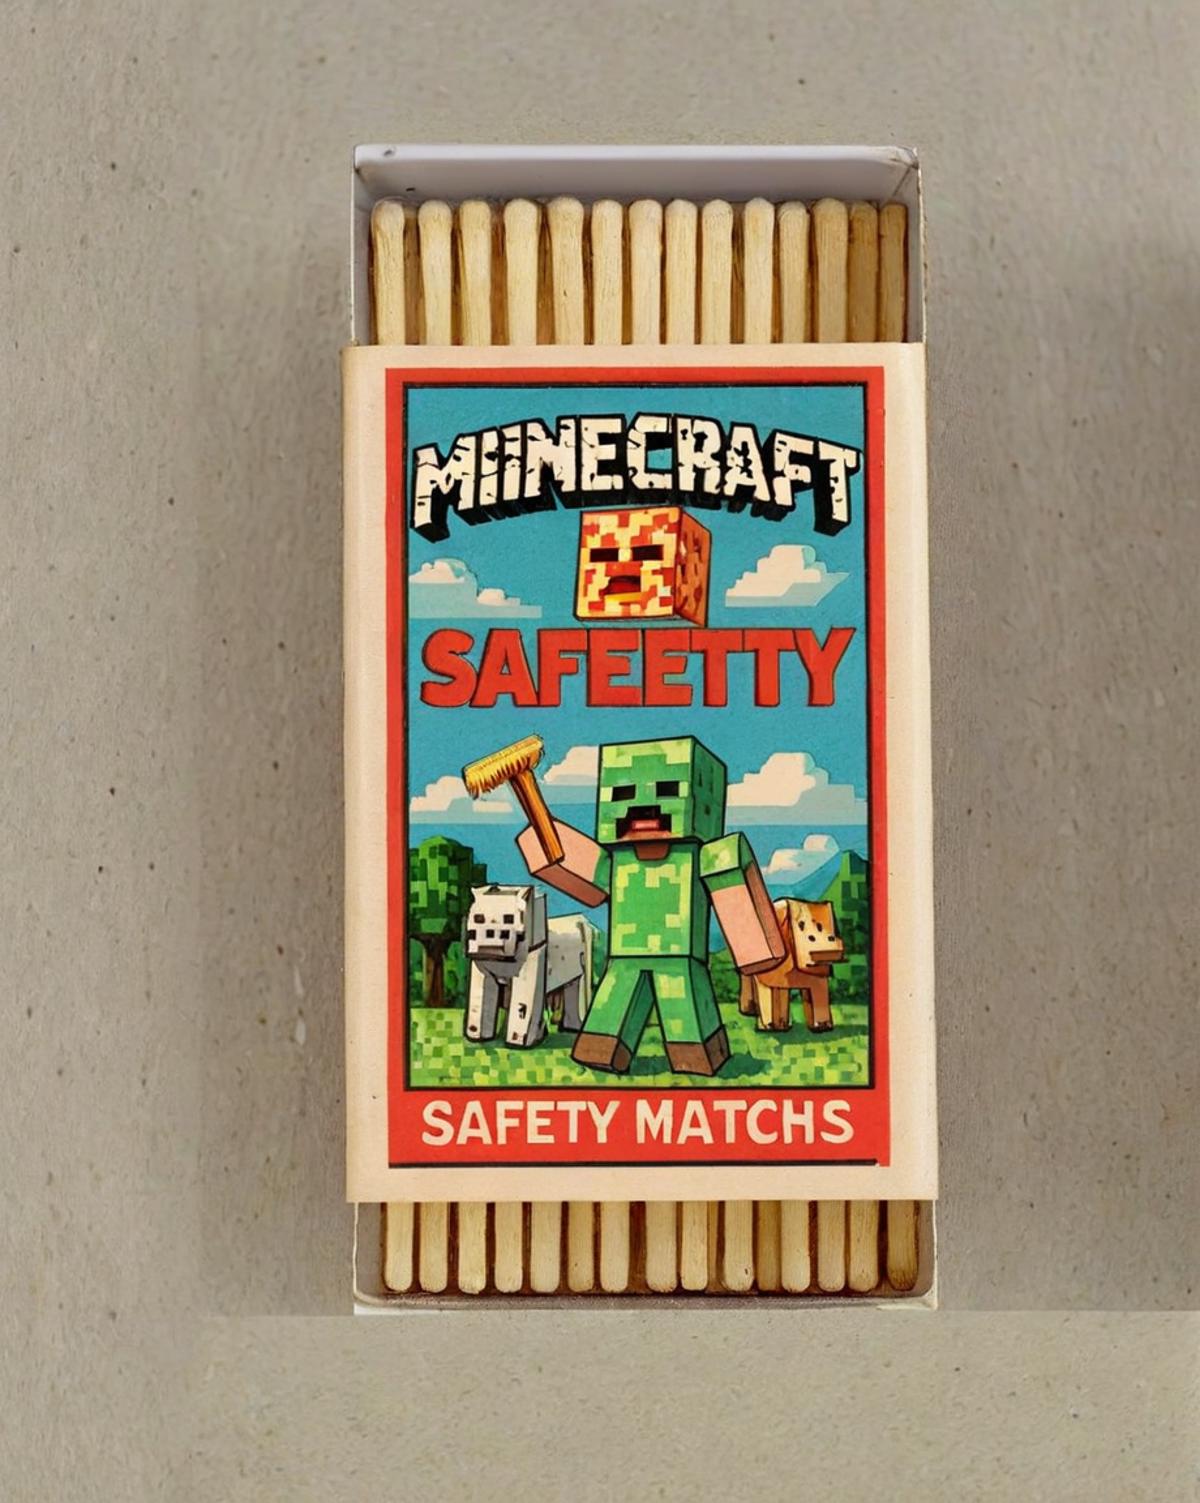 Wizard's Vintage Matchbox image by AdrarDependant